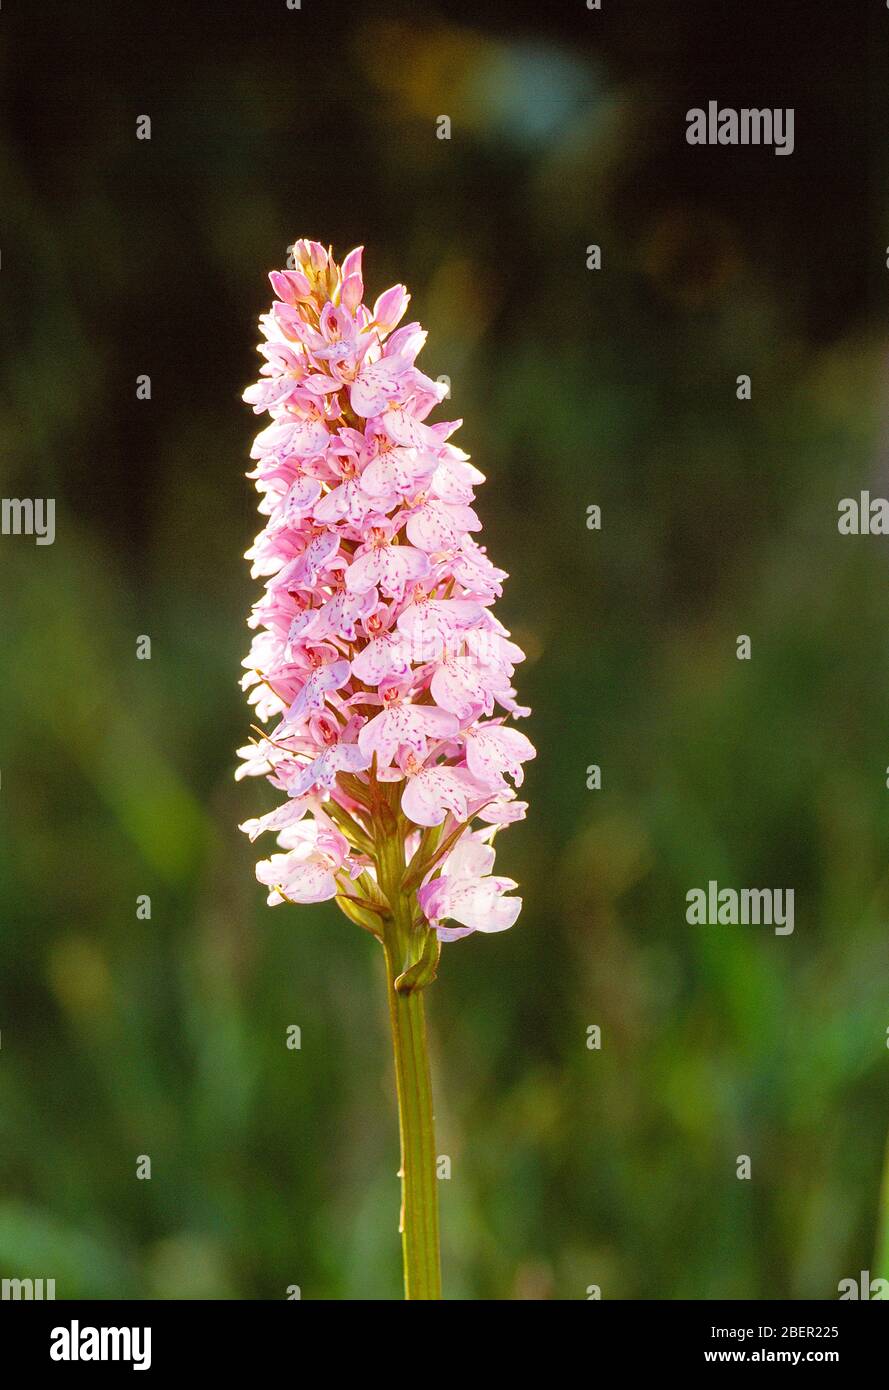 Guernsey. Flowering plants. Wild orchid flower (Dactylorhiza maculata). Stock Photo